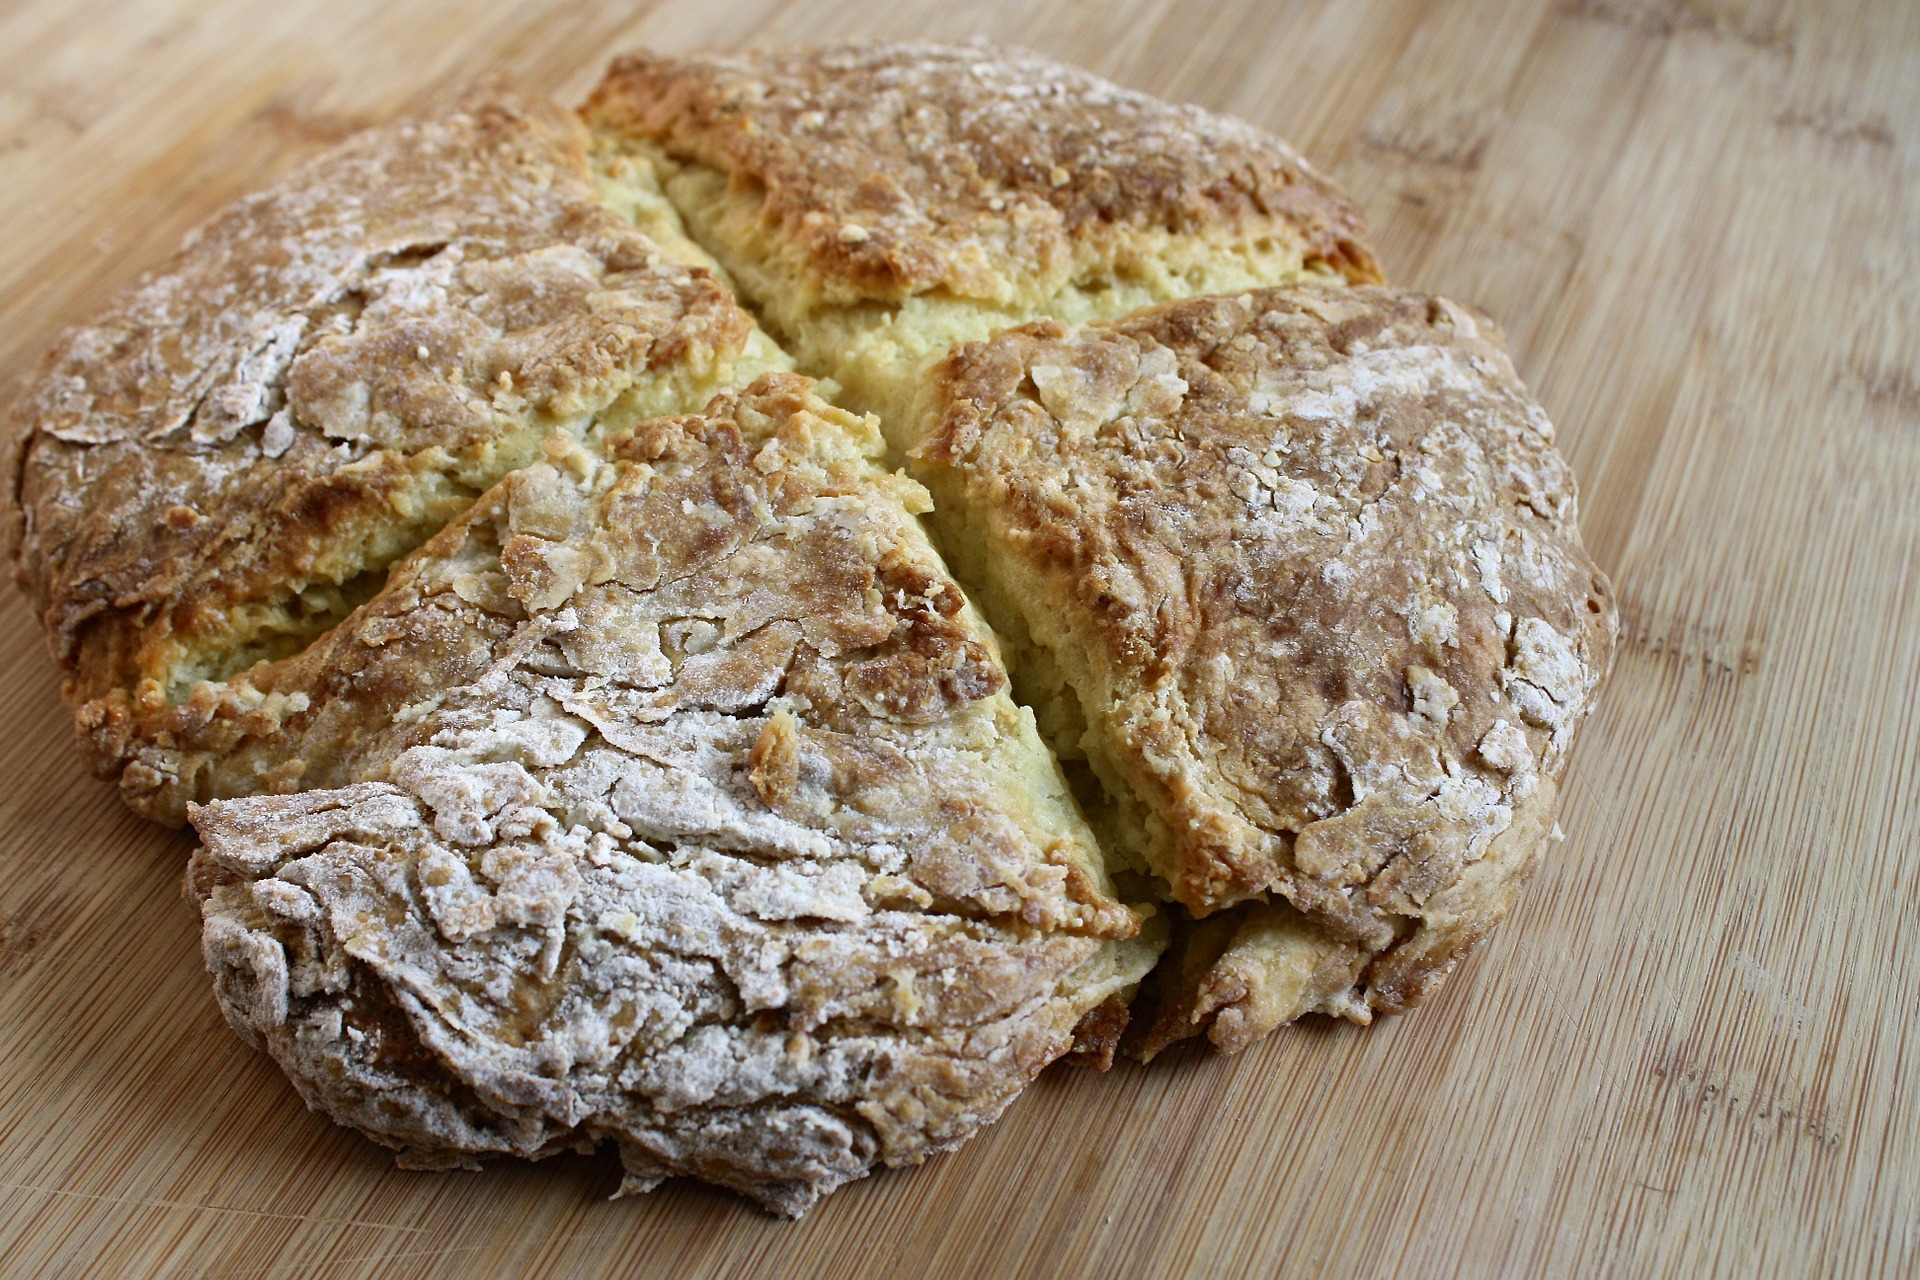 Gut-Healthy Soda Bread Whip Up Gut-Friendly Bread In A Snap With This Easy-To-Follow Recipe